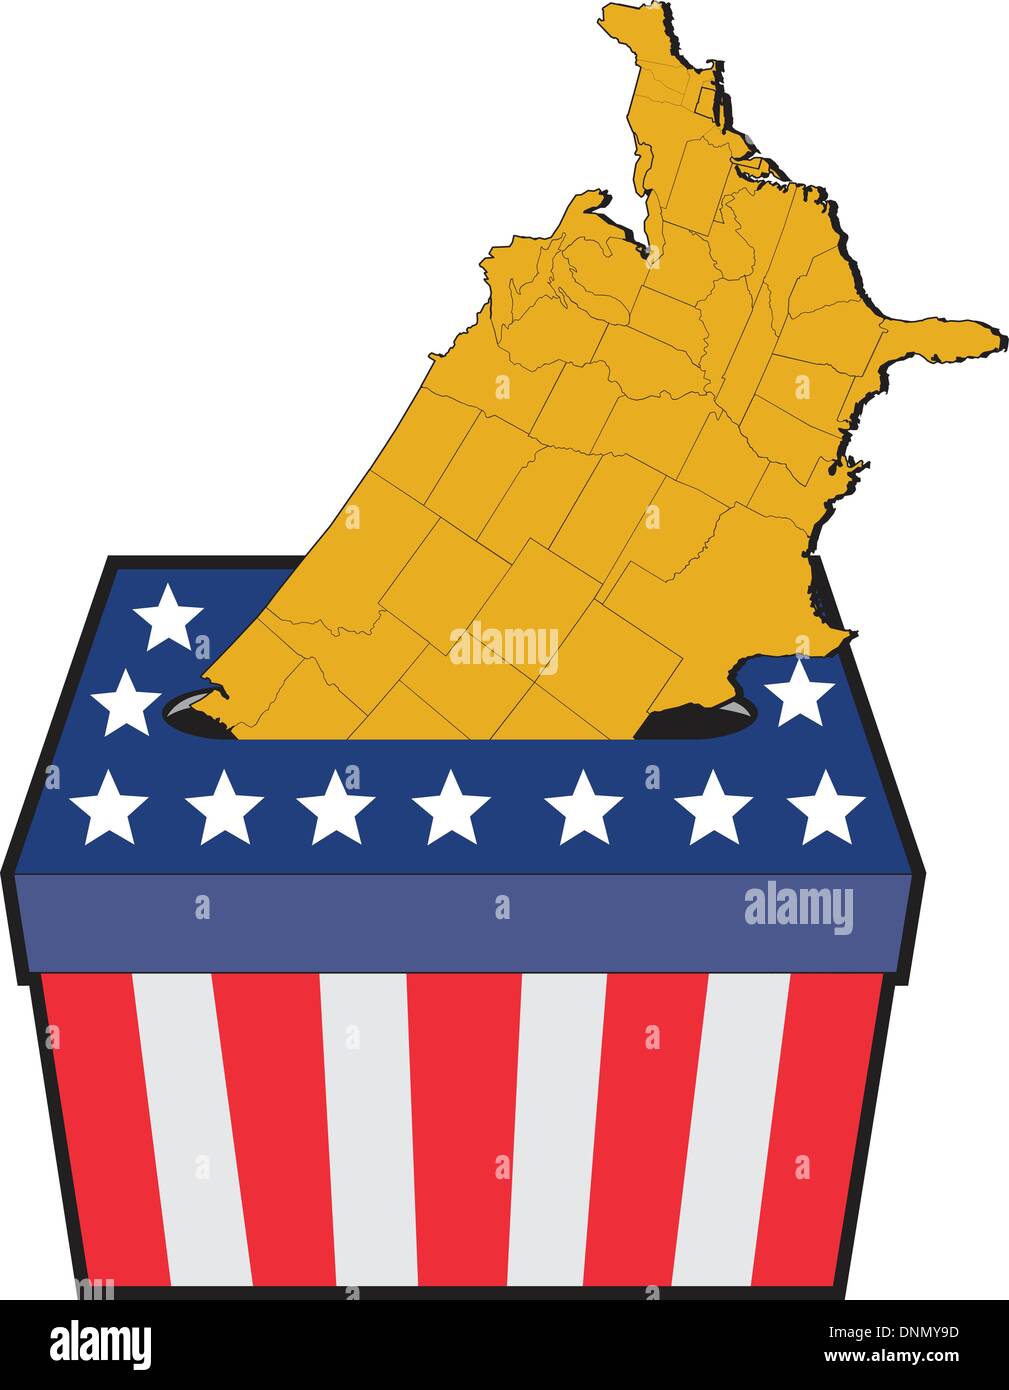 illustration of an election ballot box with American stars and stripes flag and map of United States of America on isolated background Stock Vector